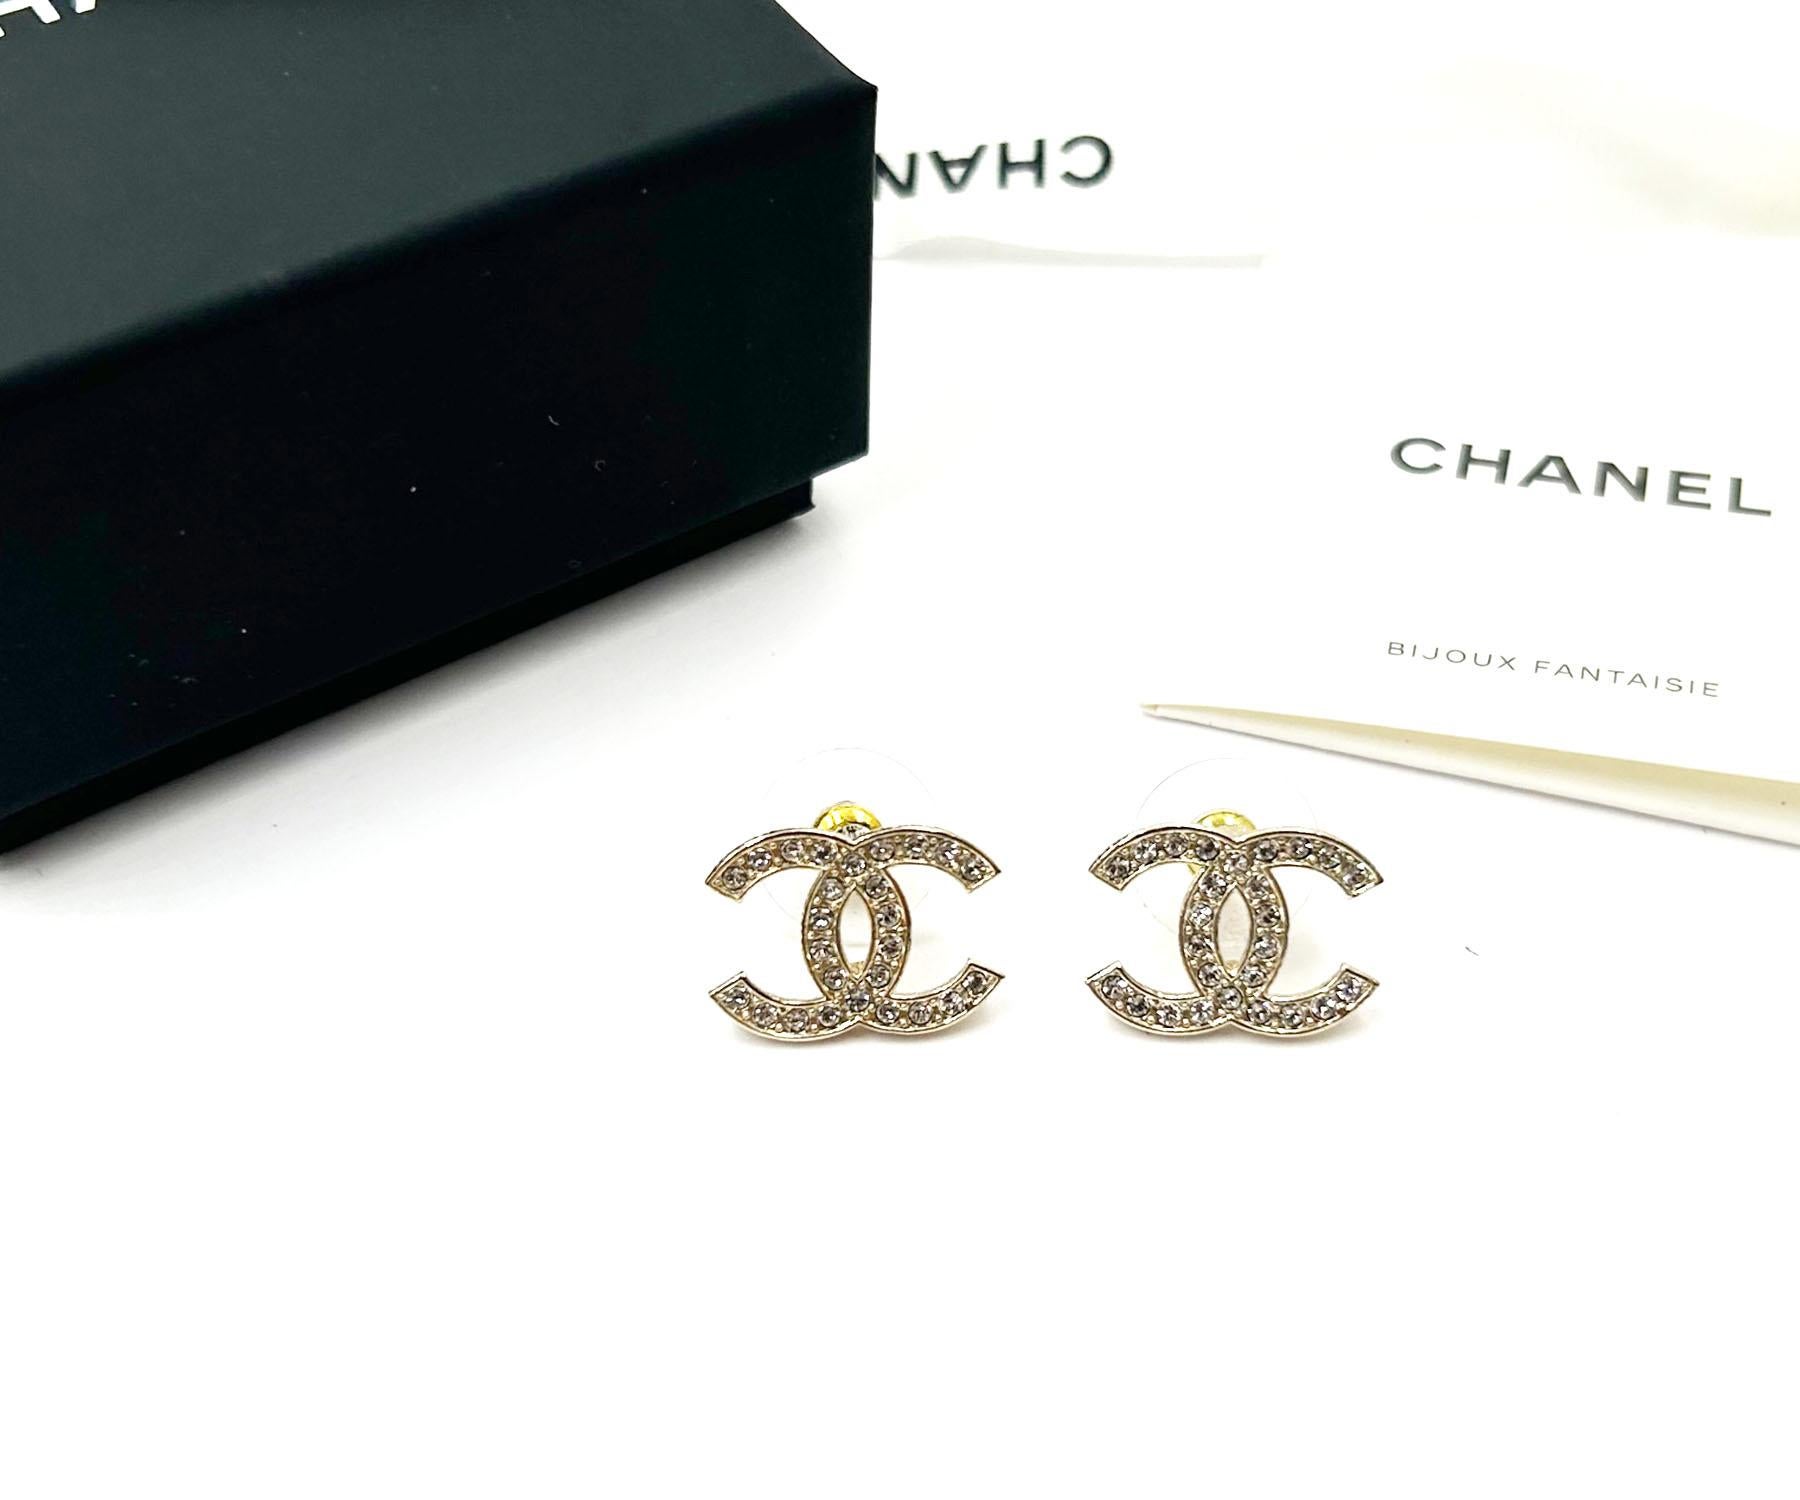 Chanel Brand New Classic Gold CC Large Piercing Earrings

*Marked 23
*Made in France
*Comes with the original box, pouch, booklet and ribbon
*Brand New

-It is approximately 0.5